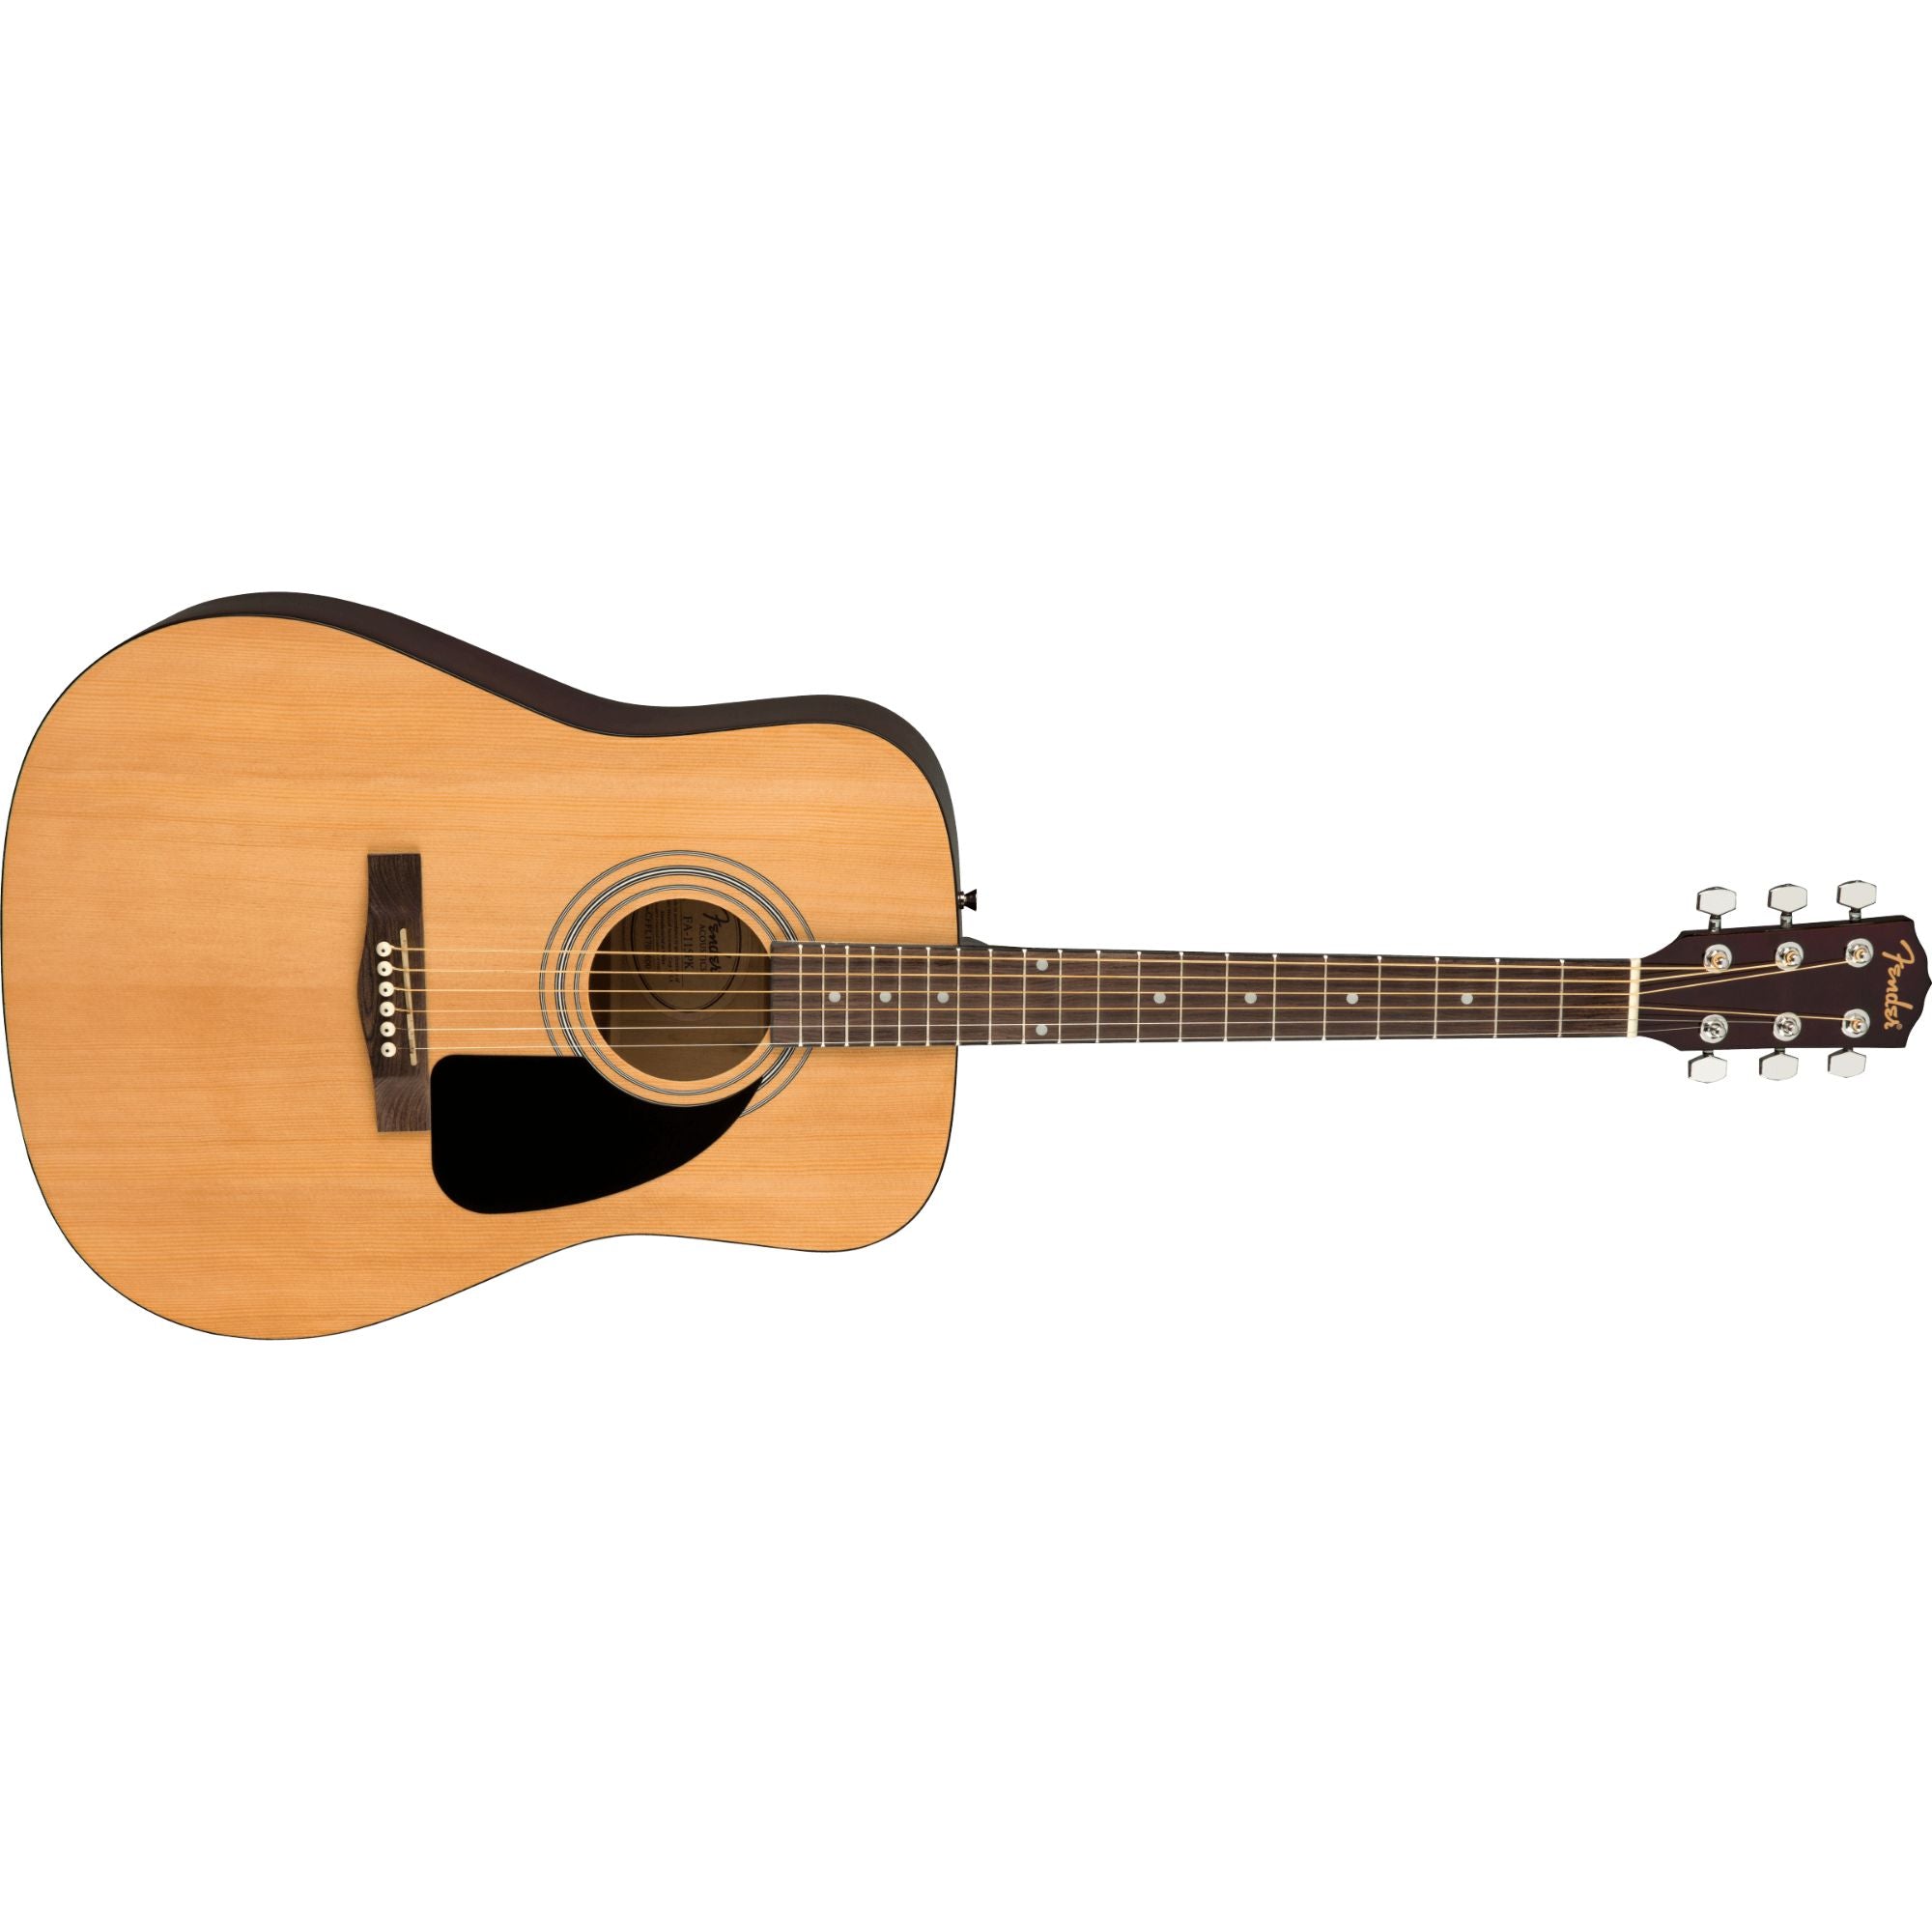 Fender FA-115 Dreadnought Acoustic Pack, Natural